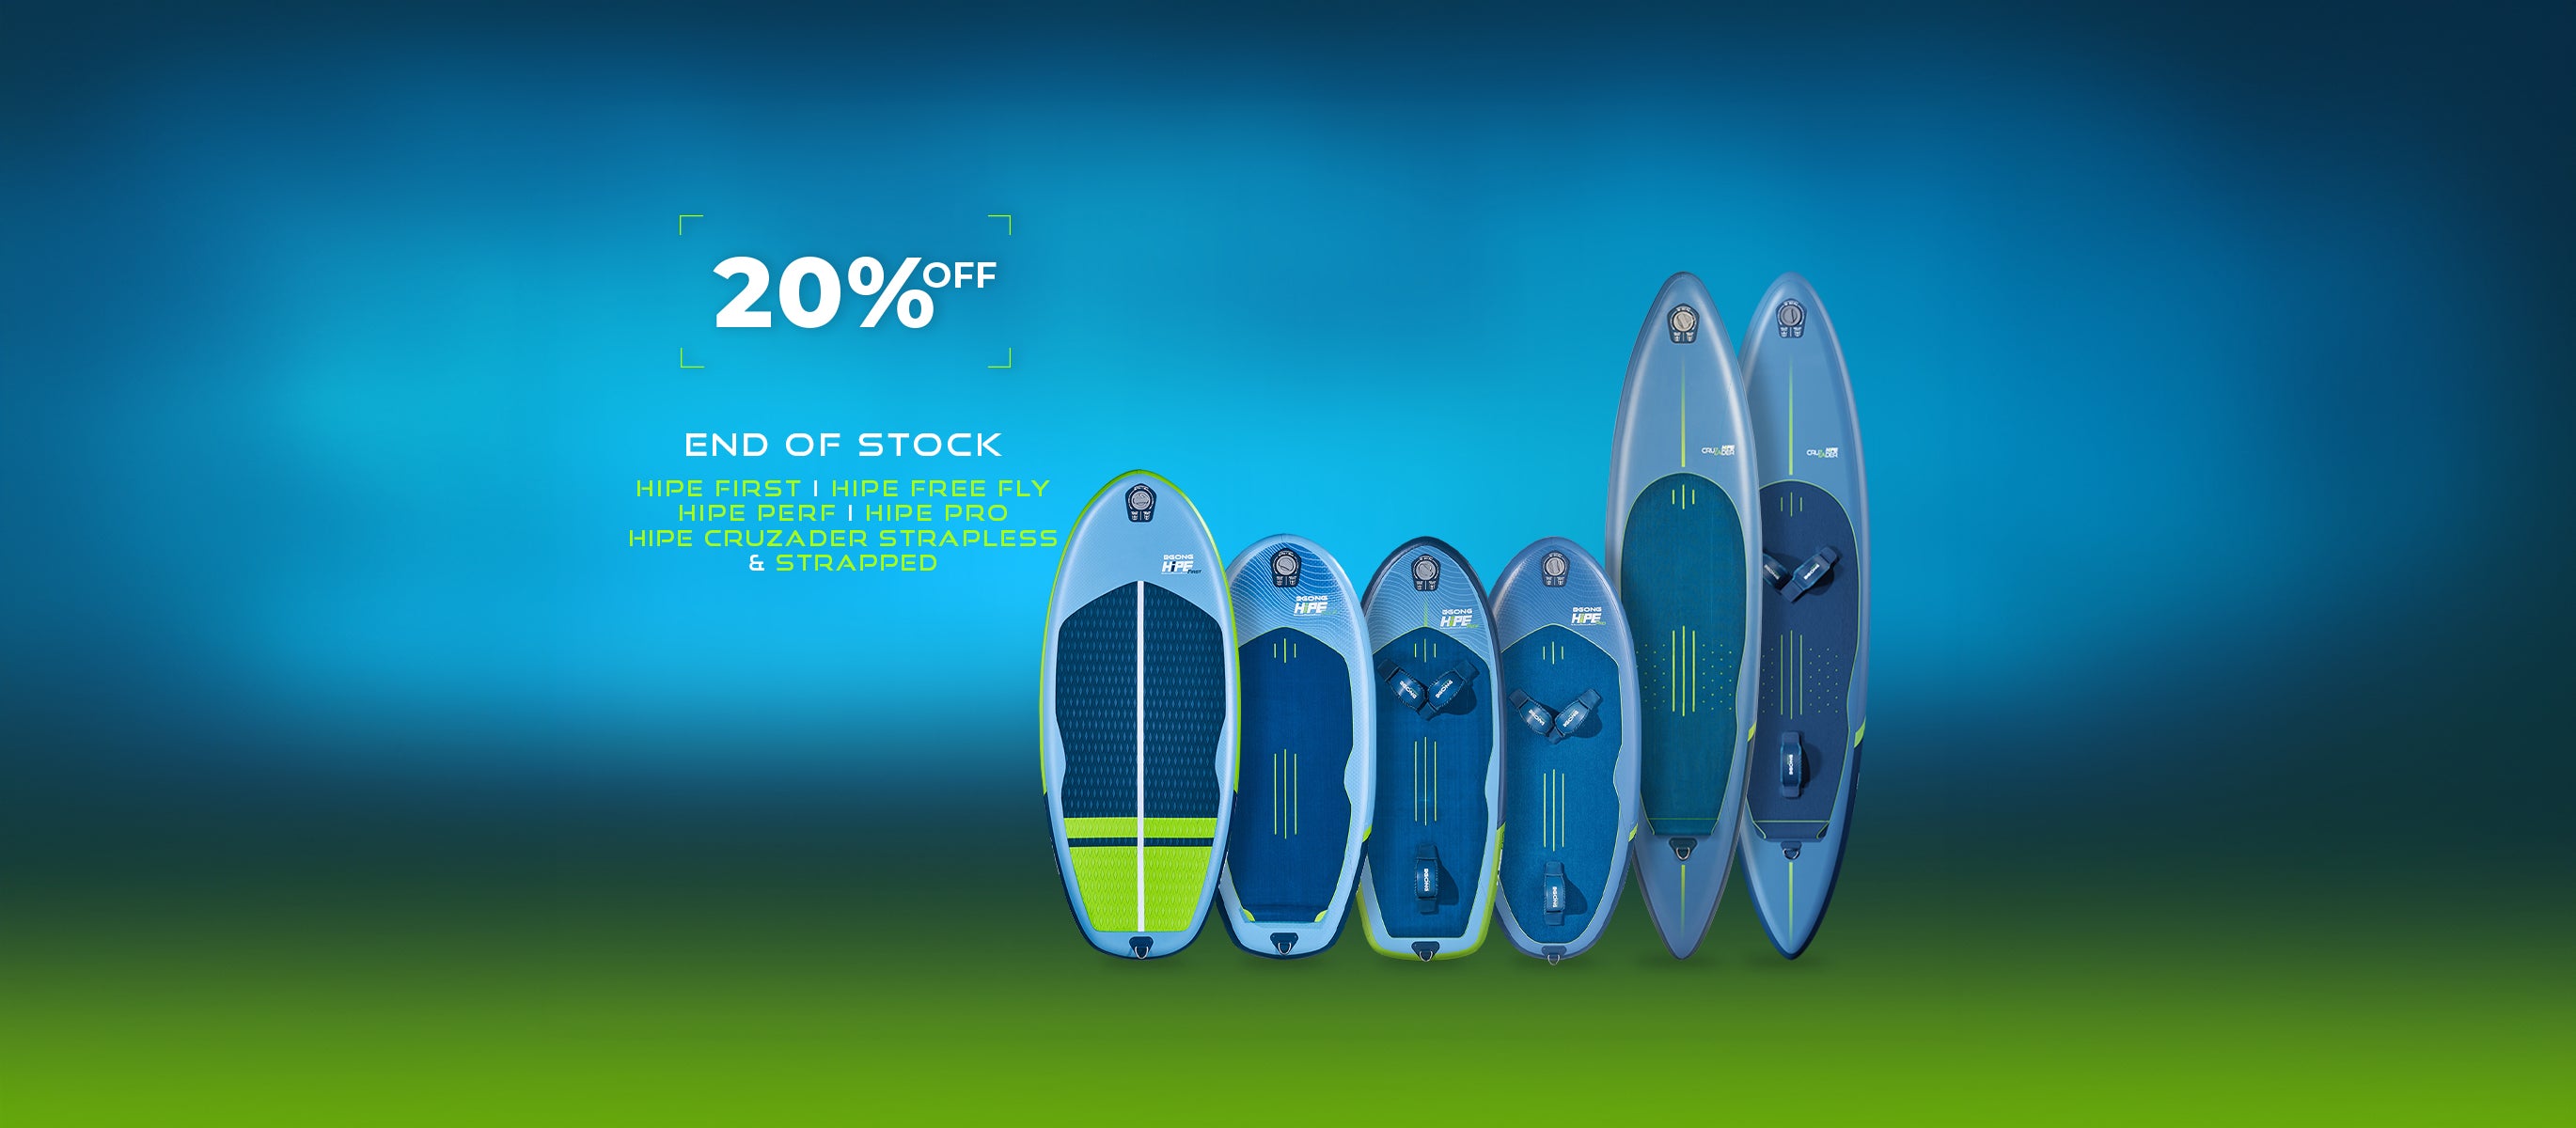 SHOP: OUR INFLATABLE FOILING BOARDS ON PROMOTION!